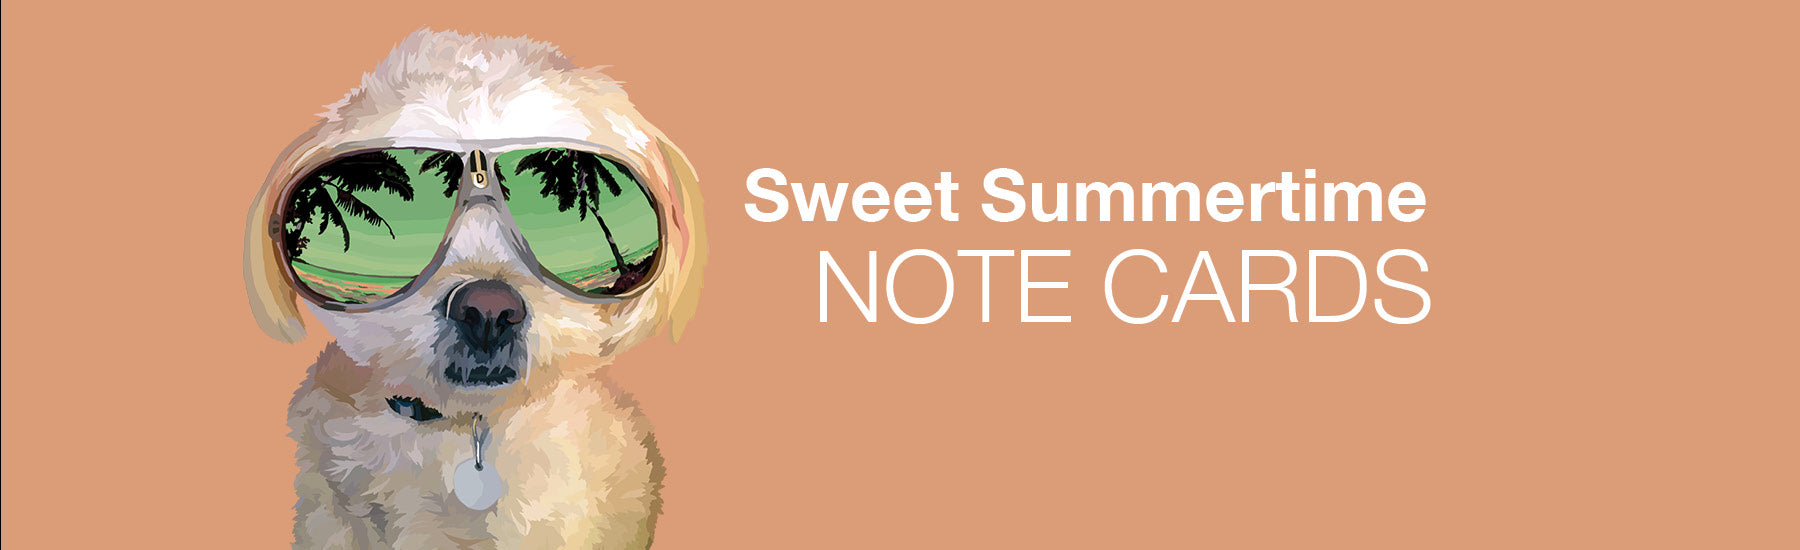 SUMMER NOTE CARDS